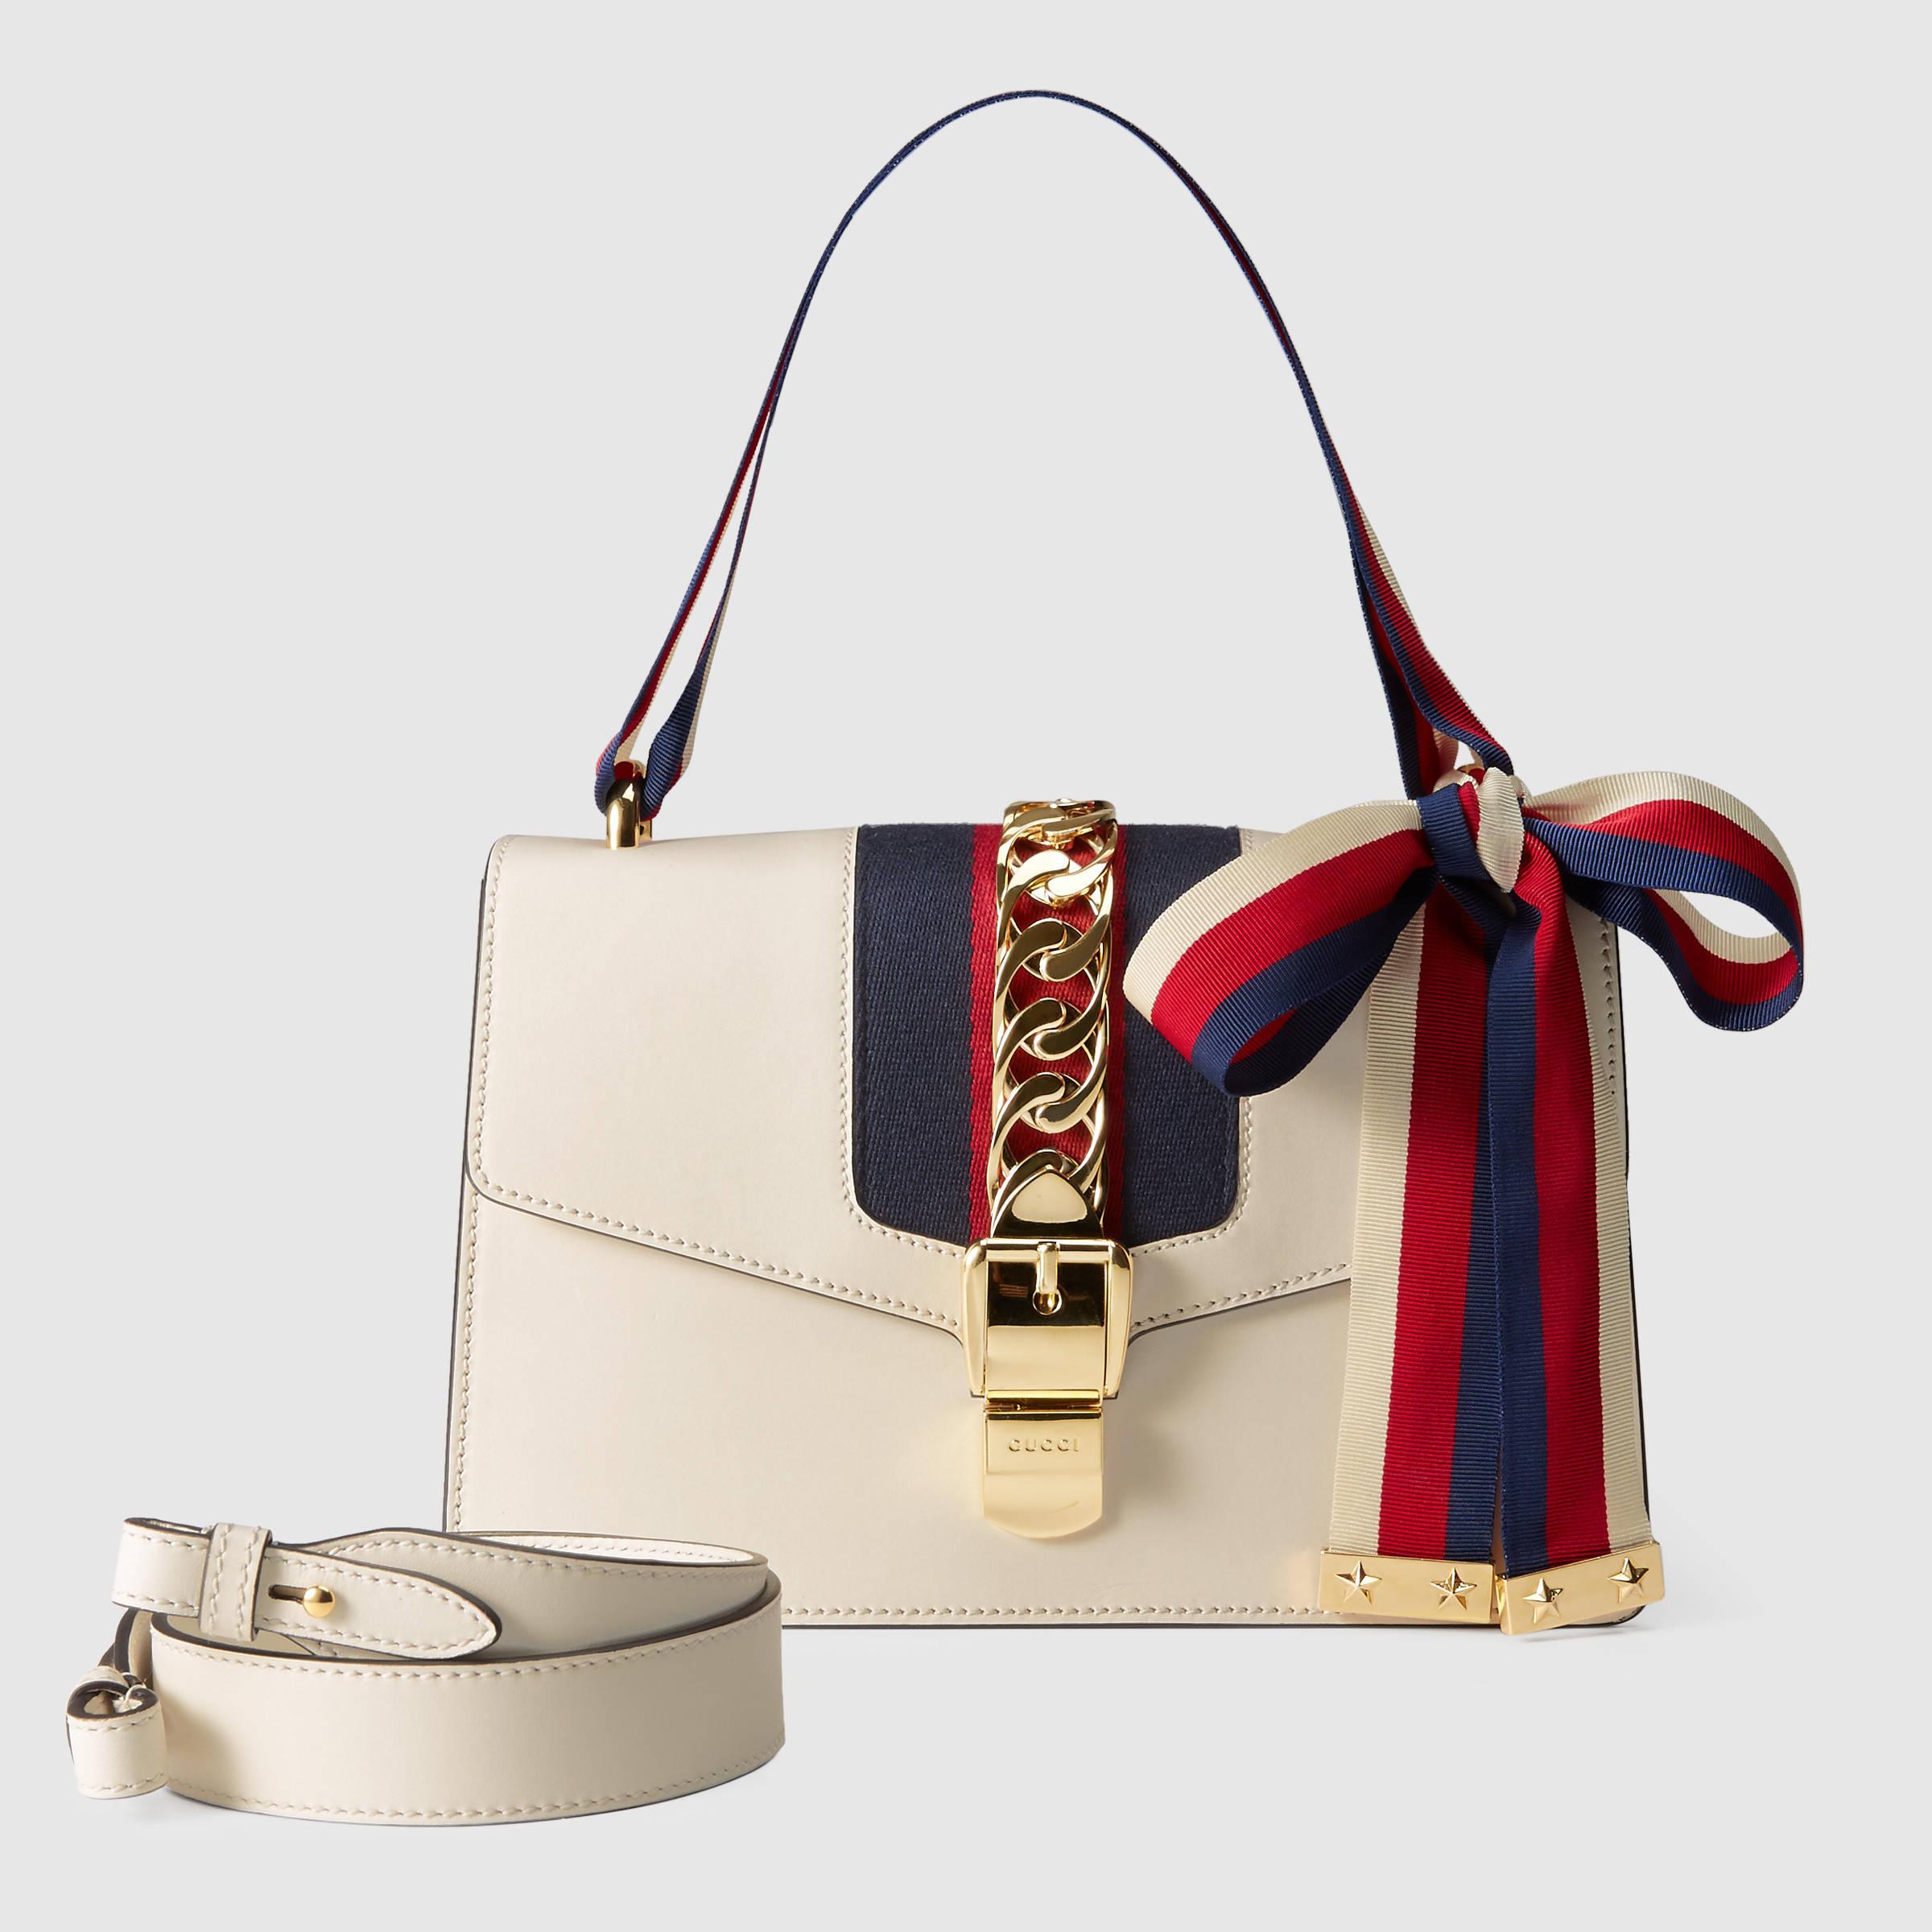 Lyst - Gucci Sylvie Leather Shoulder Bag in White